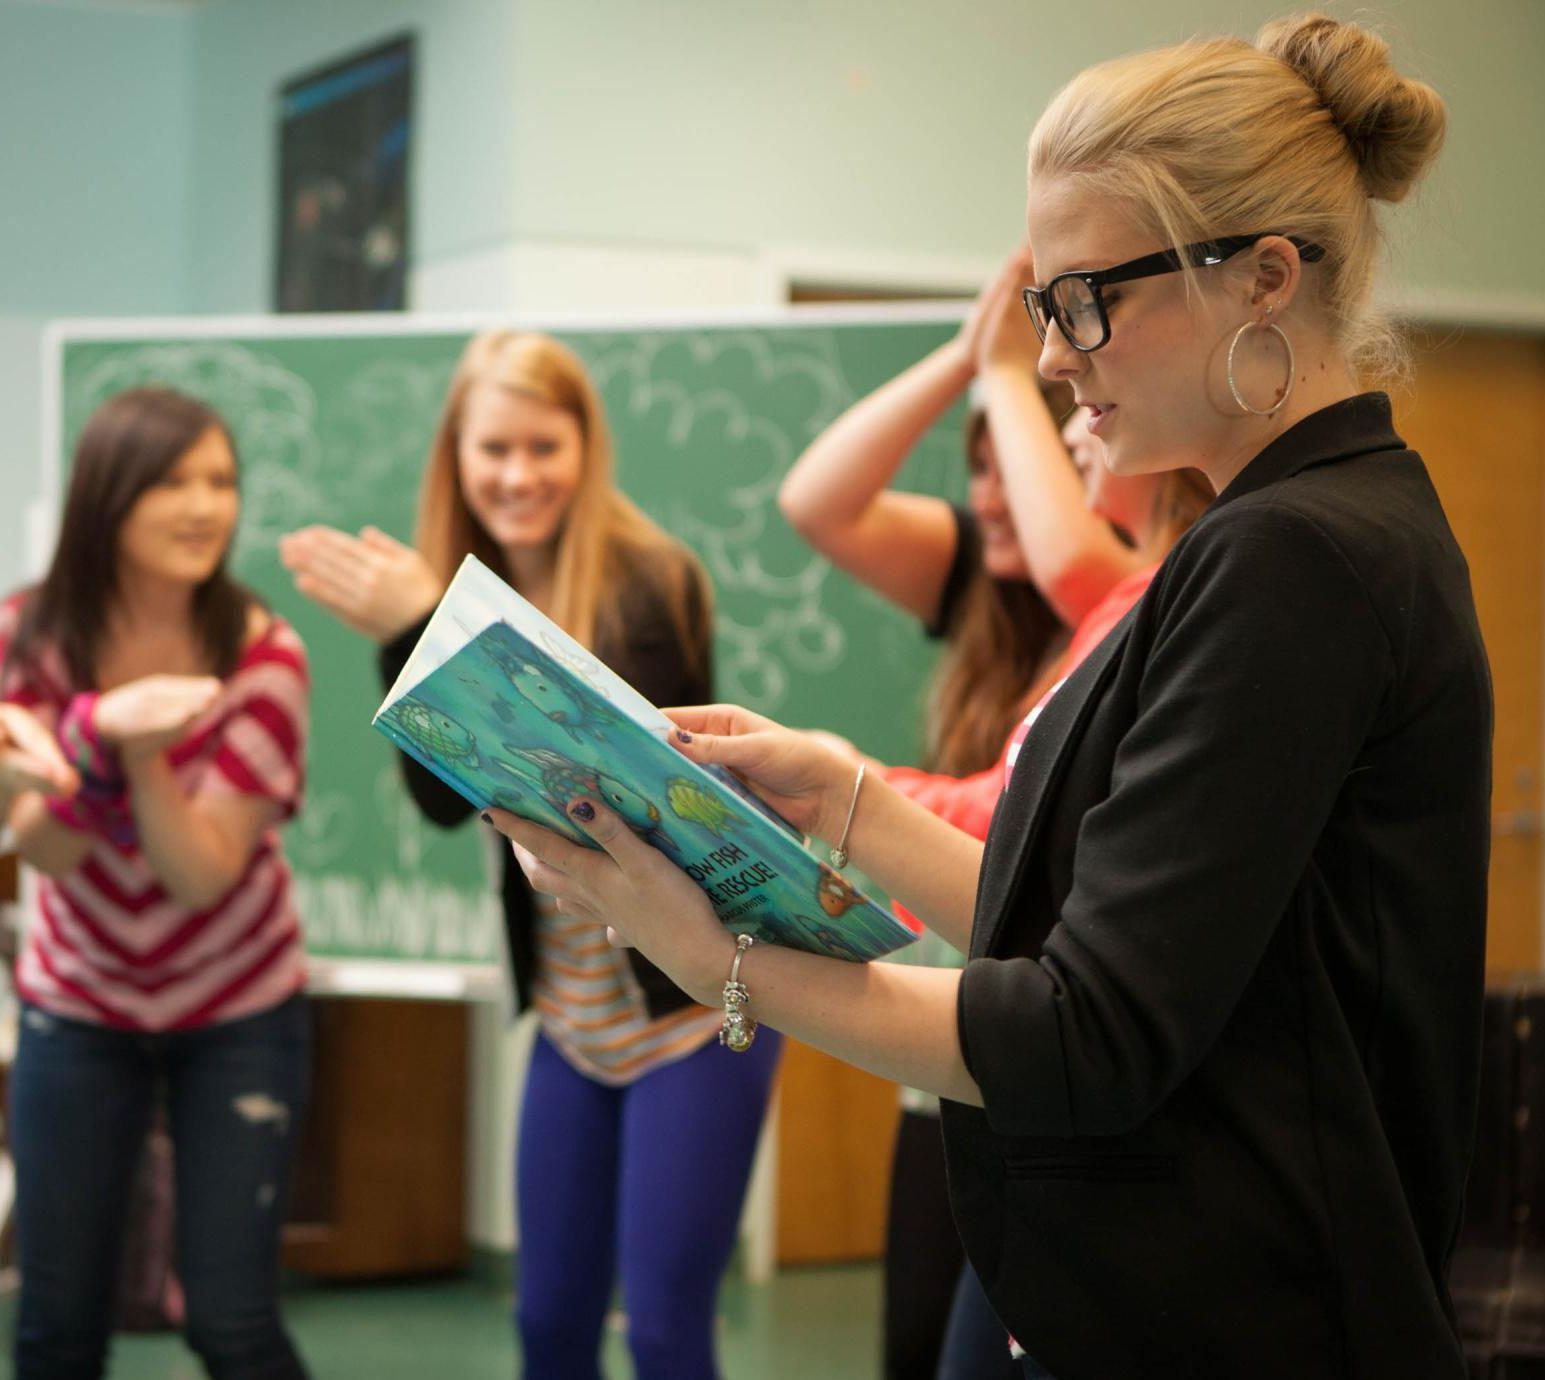 A person in glasses reads from a children's book as students listen behind her